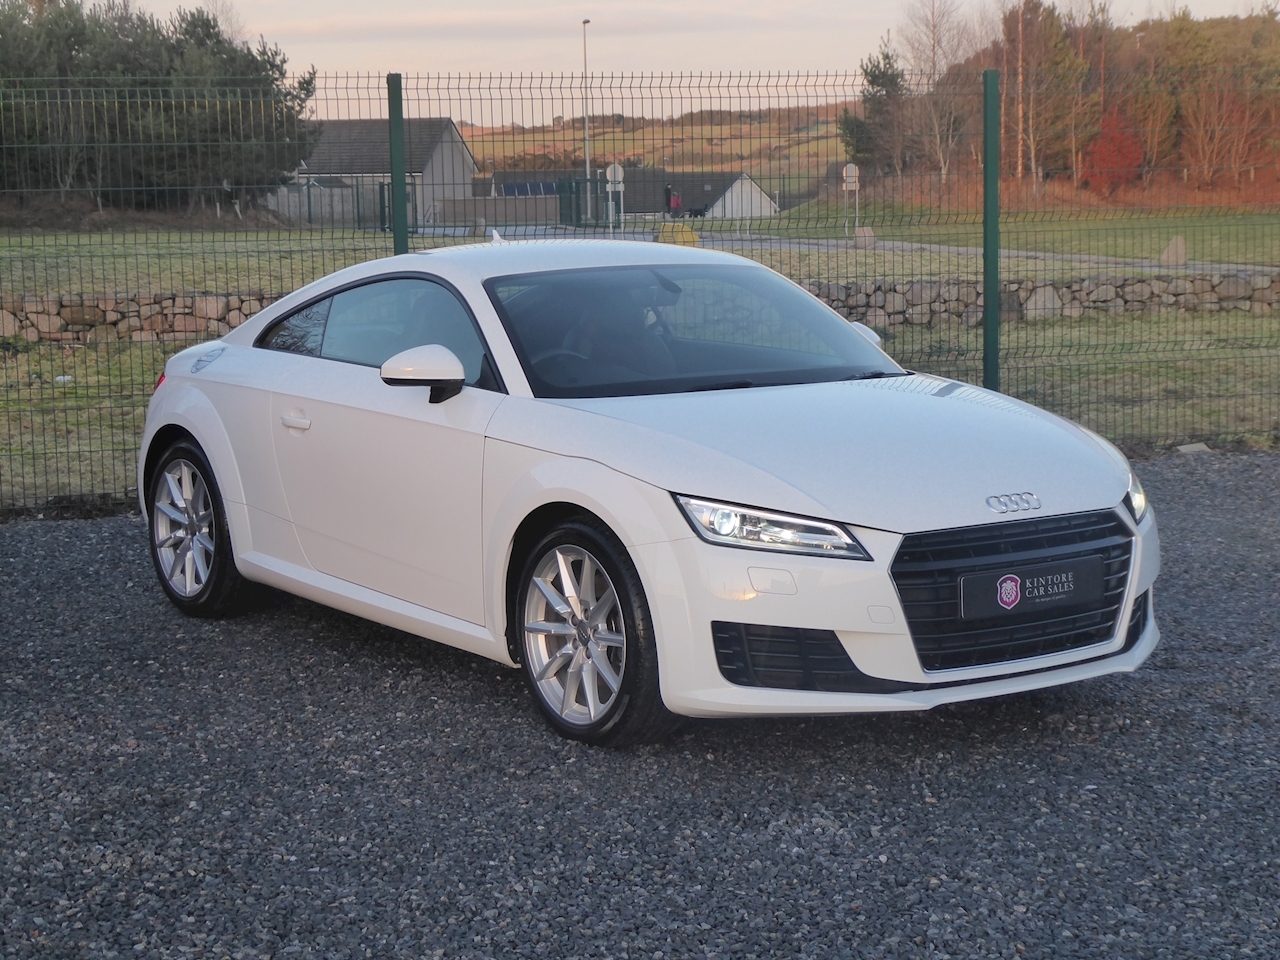 TT 1.8 TFSI Sport Coupe 3dr Petrol (s/s) (180 ps) 1.8 3dr Coupe Manual Petrol